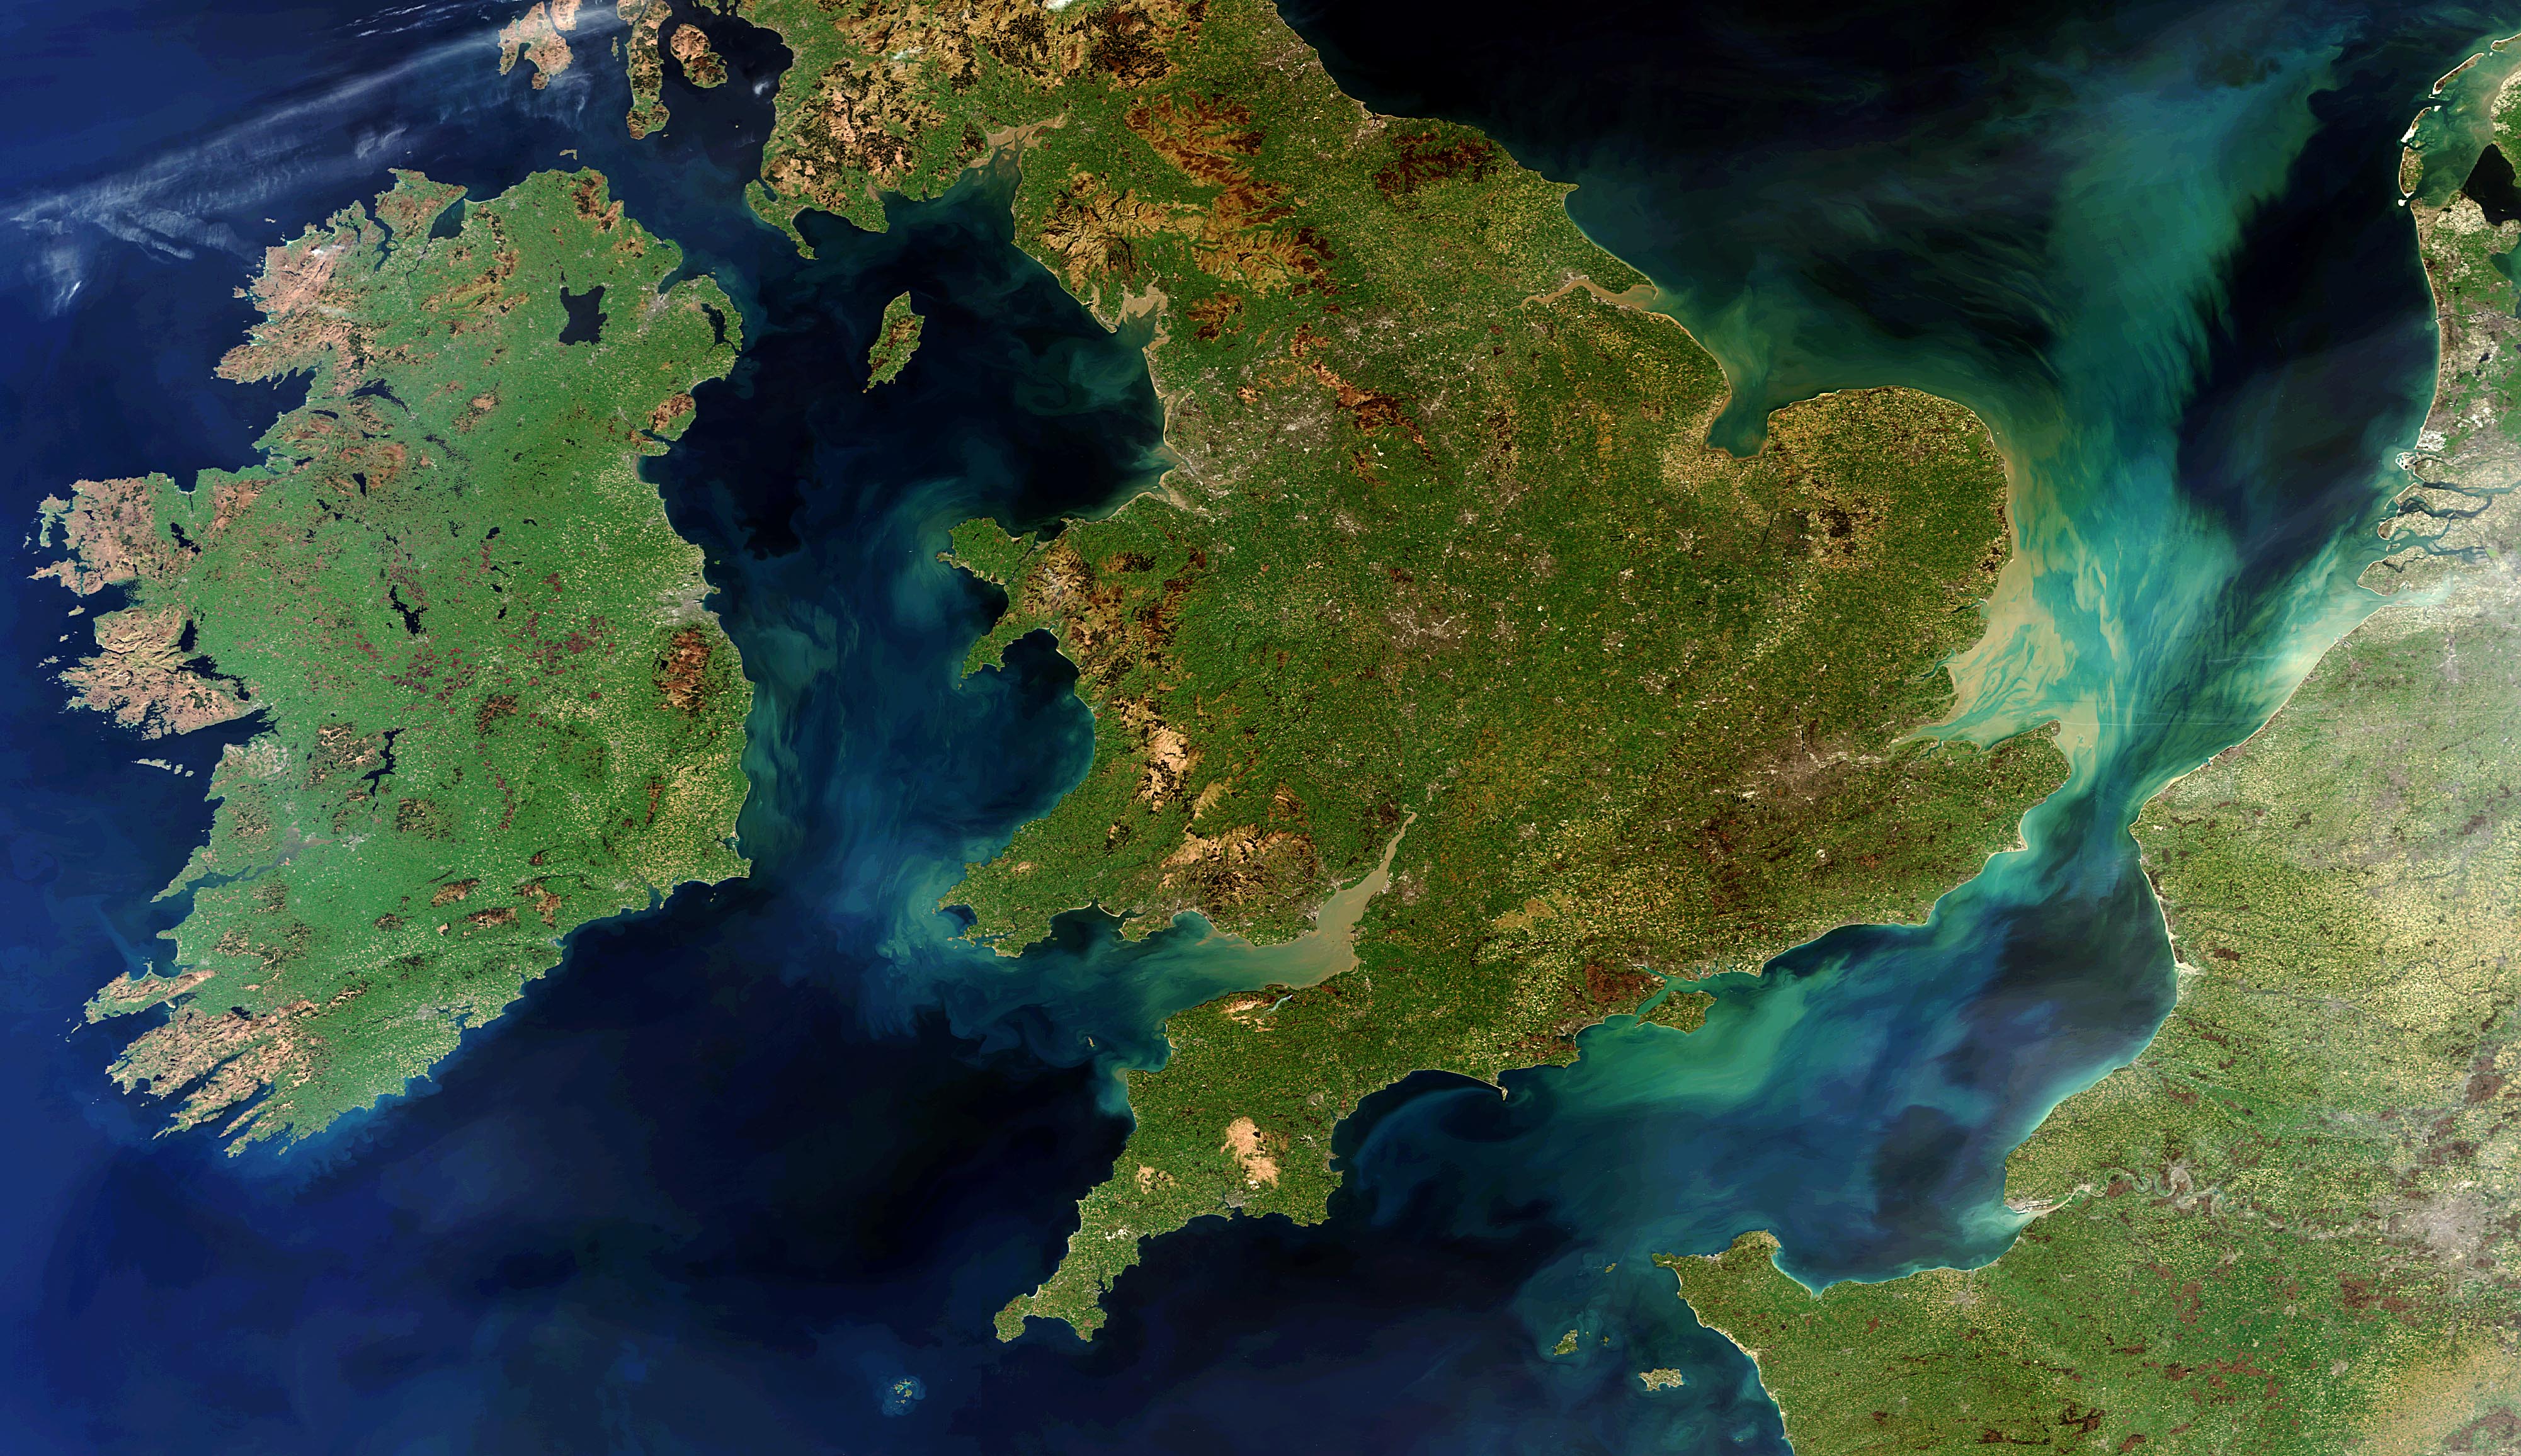 ESA - A rare cloud-free view of Ireland, Great Britain and northern France